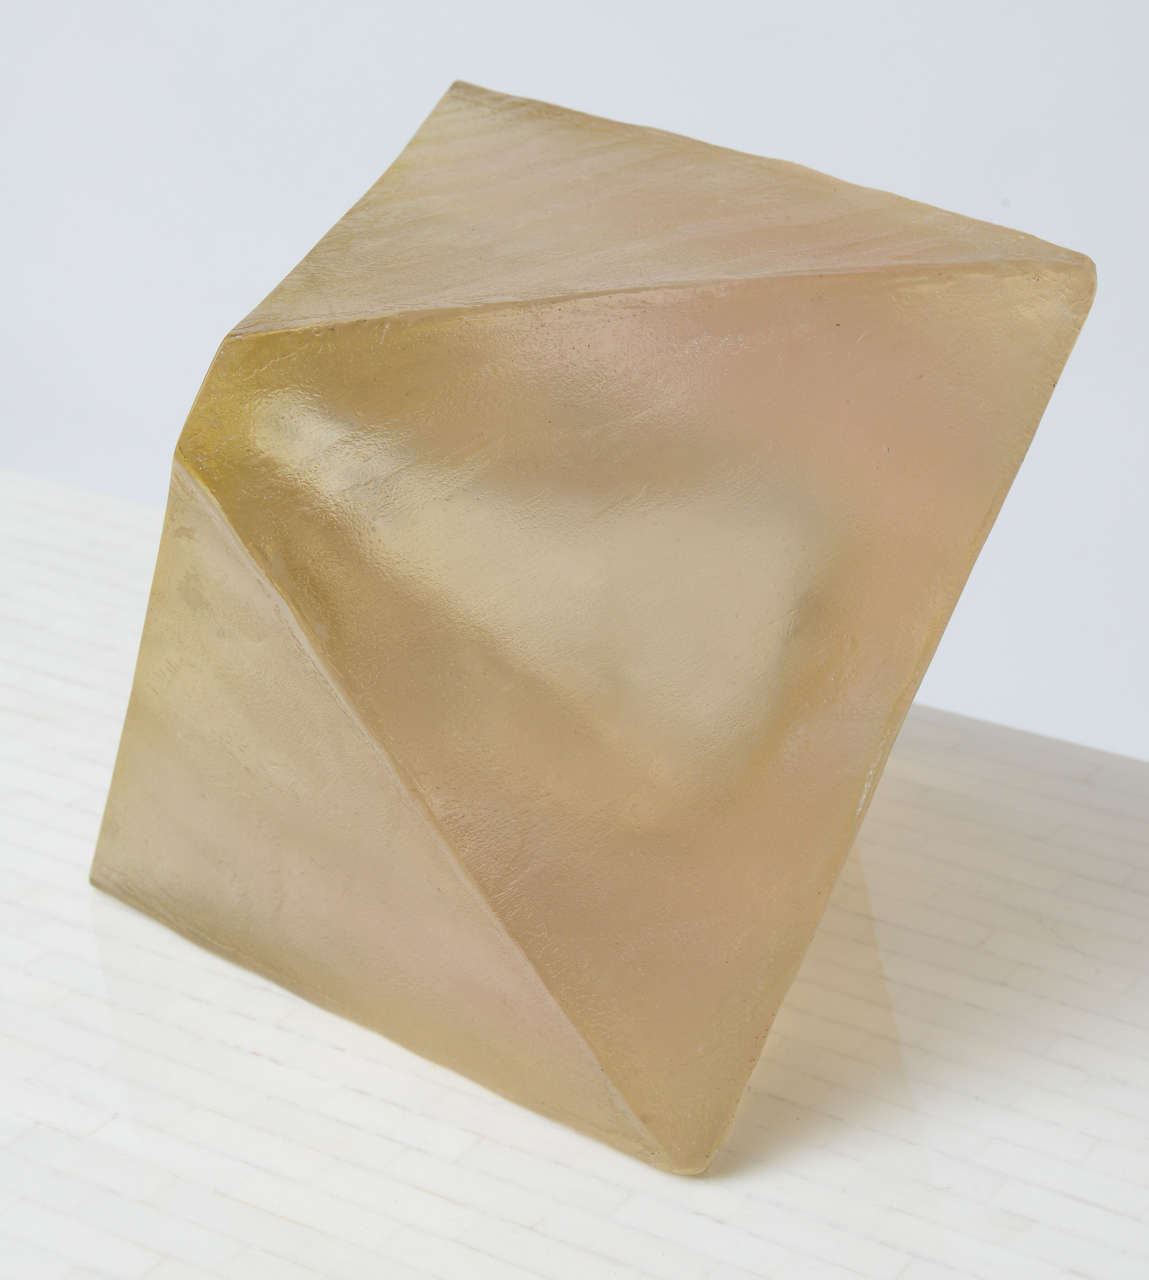 Polyhedral Resin Sculpture 1